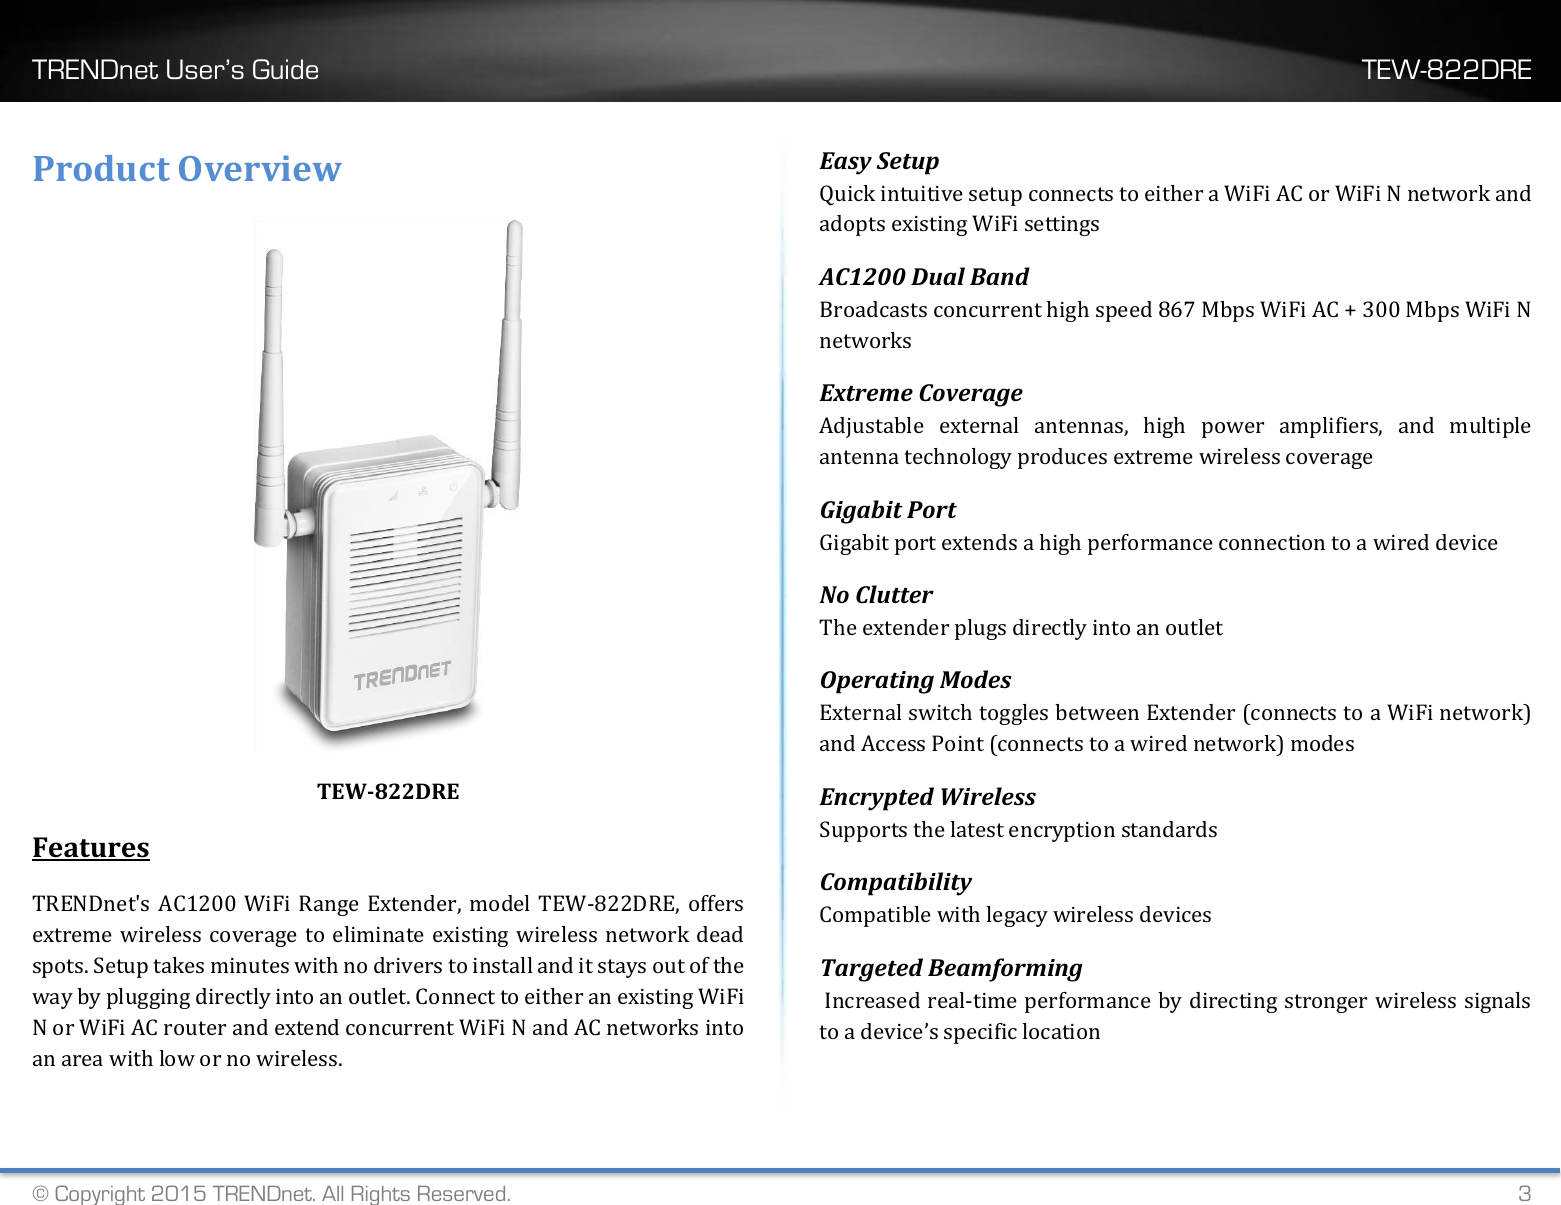 TRENDnet User’s Guide    TEW-822DRE © Copyright 2015 TRENDnet. All Rights Reserved.   3 Product Overview  TEW-822DRE Features  TRENDnet&apos;s AC1200 WiFi Range Extender, model TEW-822DRE, offers extreme wireless coverage to eliminate existing wireless network dead spots. Setup takes minutes with no drivers to install and it stays out of the way by plugging directly into an outlet. Connect to either an existing WiFi N or WiFi AC router and extend concurrent WiFi N and AC networks into an area with low or no wireless.  Easy Setup Quick intuitive setup connects to either a WiFi AC or WiFi N network and adopts existing WiFi settings AC1200 Dual Band Broadcasts concurrent high speed 867 Mbps WiFi AC + 300 Mbps WiFi N networks Extreme Coverage Adjustable  external  antennas,  high  power  amplifiers,  and  multiple antenna technology produces extreme wireless coverage  Gigabit Port  Gigabit port extends a high performance connection to a wired device  No Clutter  The extender plugs directly into an outlet  Operating Modes External switch toggles between Extender (connects to a WiFi network) and Access Point (connects to a wired network) modes Encrypted Wireless Supports the latest encryption standards Compatibility Compatible with legacy wireless devices Targeted Beamforming  Increased real-time performance by directing stronger wireless signals to a device’s specific location 